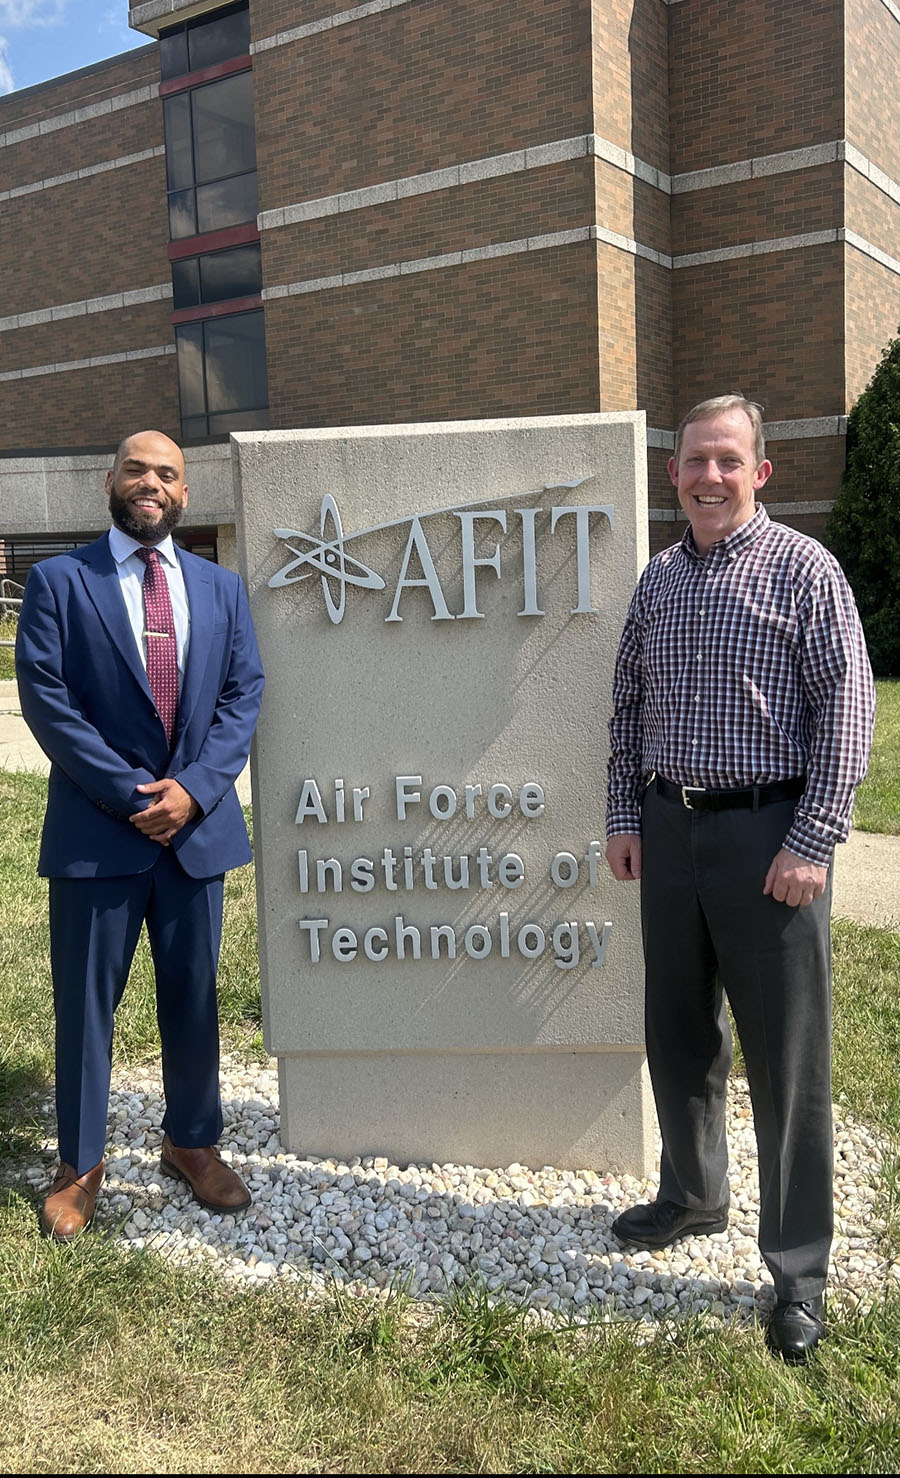 Carson Long (left) is pictured with his doctoral advisor, Dr. Brian Lunday, outside the Air Force Institute of Technology after defending his dissertation last August.